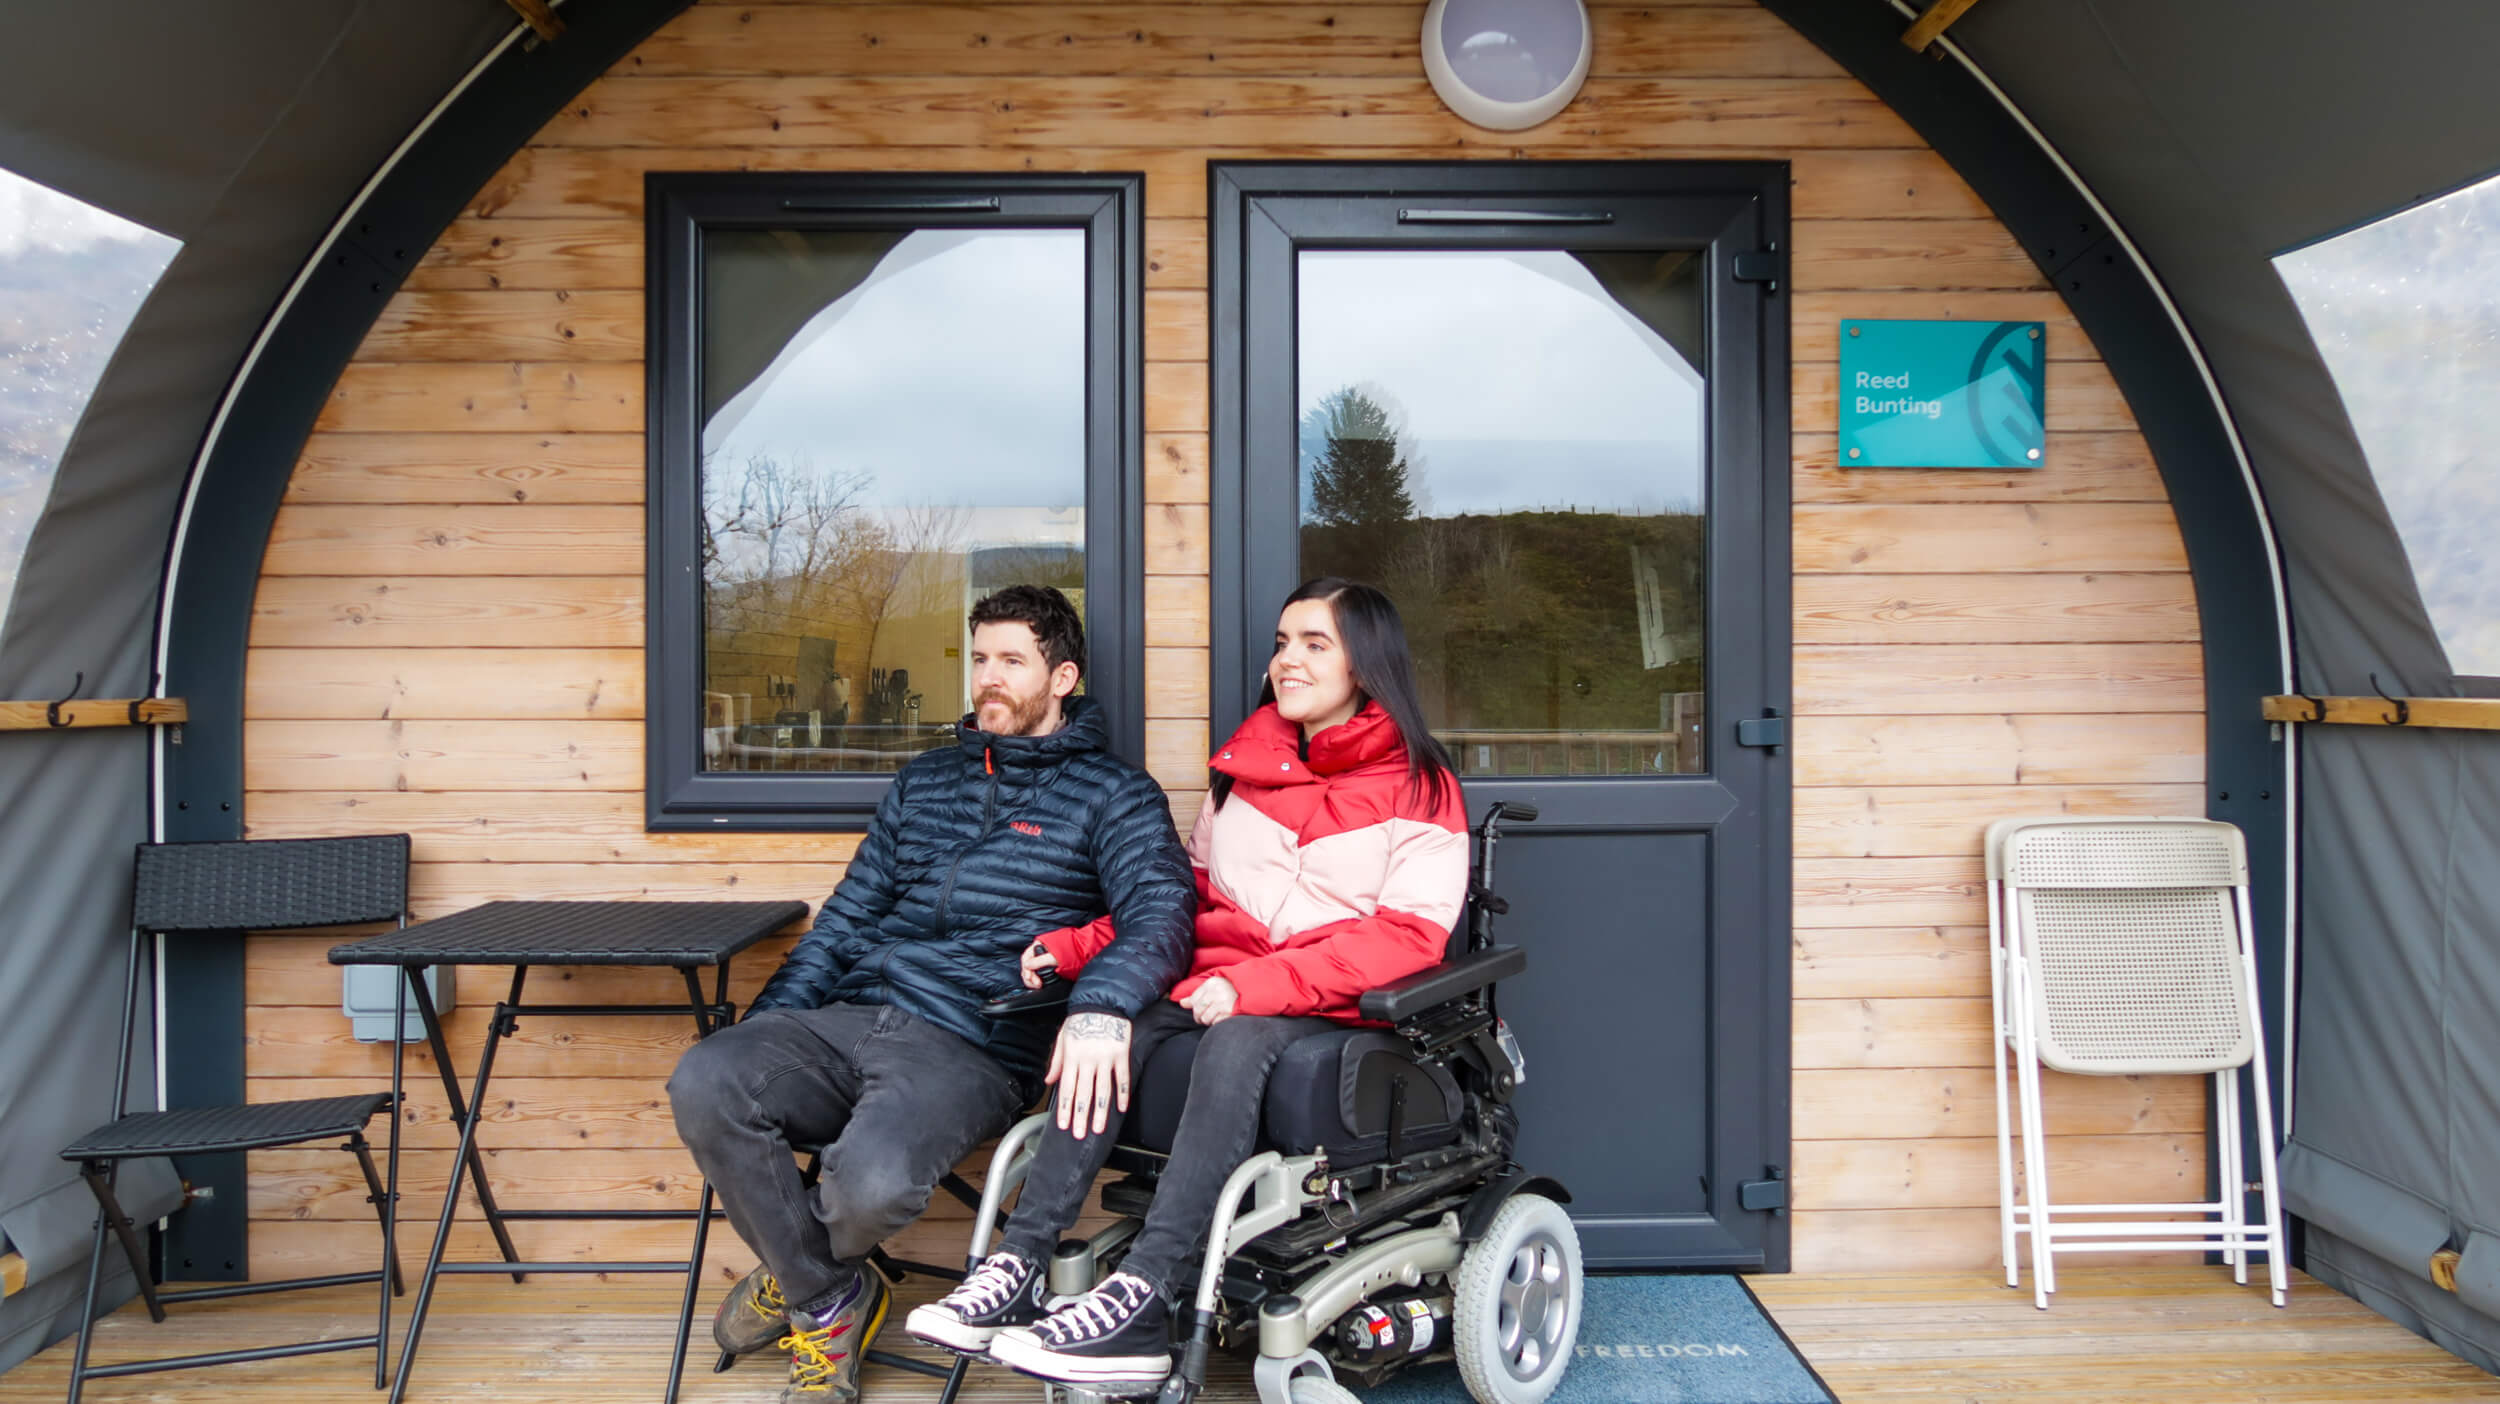 Emma and Allan sitting on the wooden deck under a sheltered canopy roof. The door to the accessible glamping pod is directly behind them. Emma is wearing a red puffy jacket, black jeans and black converse. Allan is wearing a dark blue puffy jacket, black jeans and walking shoes. They are both smiling.